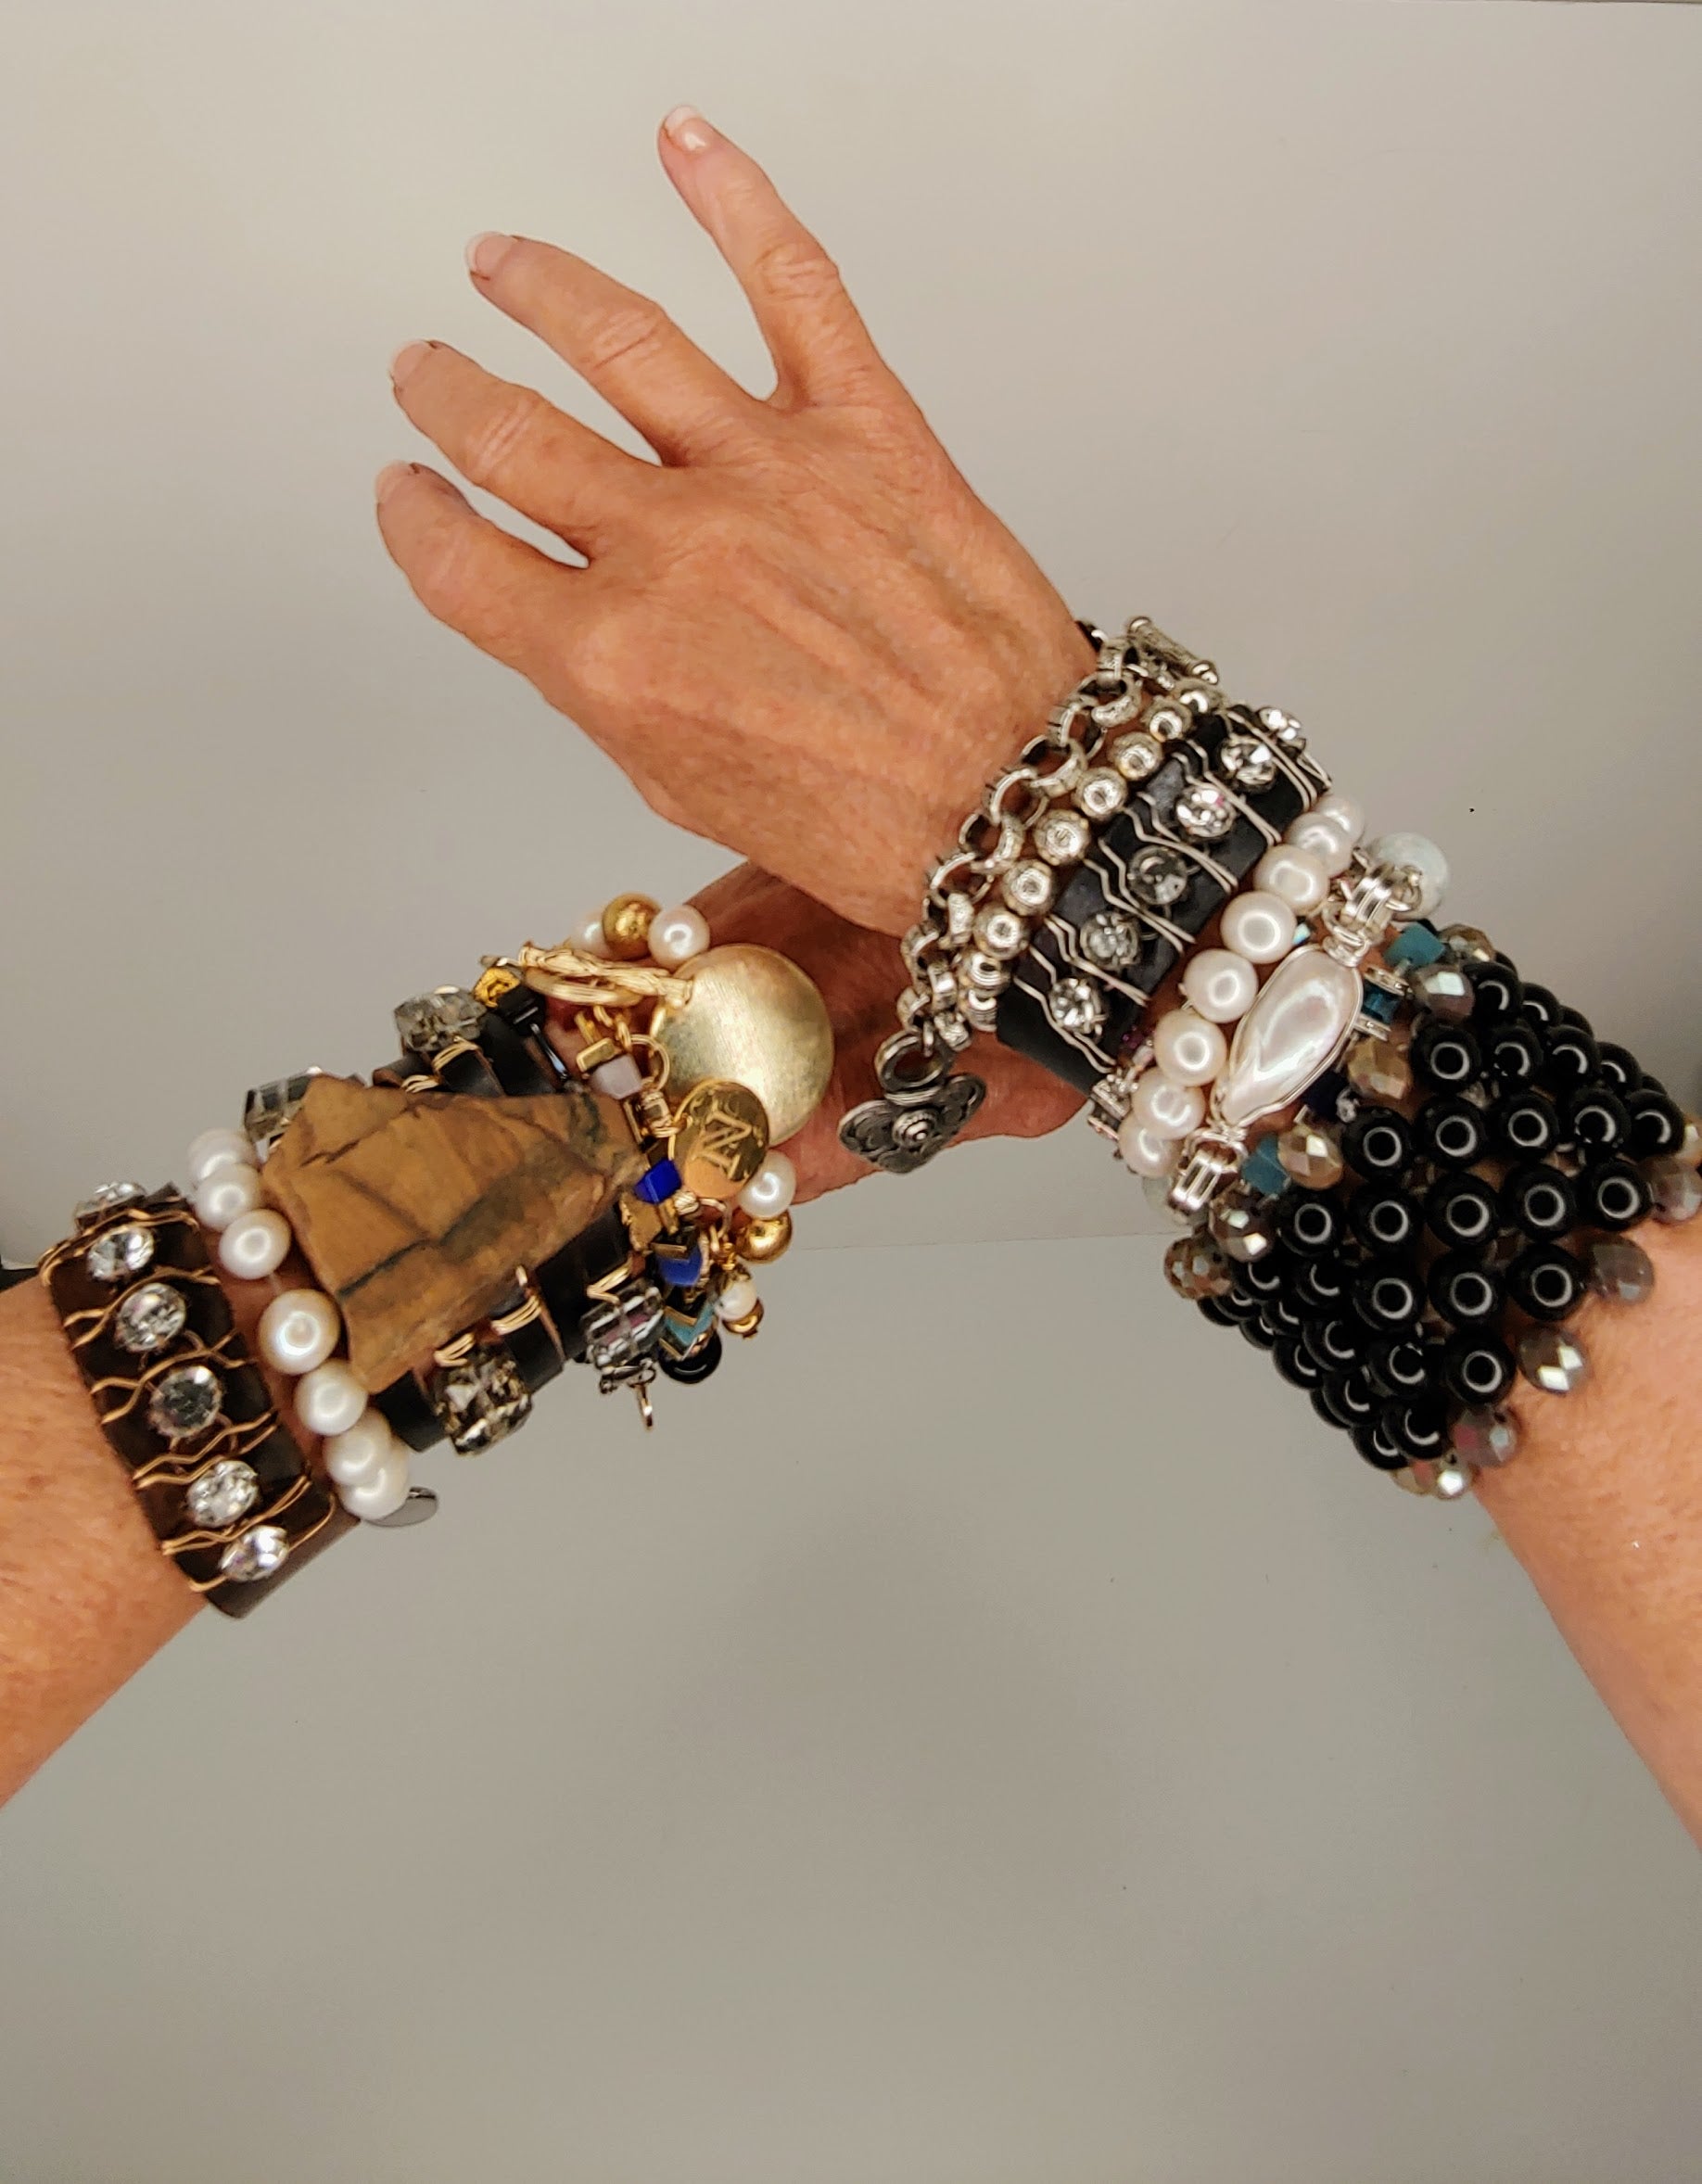 Buy handmade Leather Gemstone Cuff Bracelets Online, Embroidered Pearl &  Leather Cuff Bracelet With Rhinestones - Beauty In Stone Jewelry